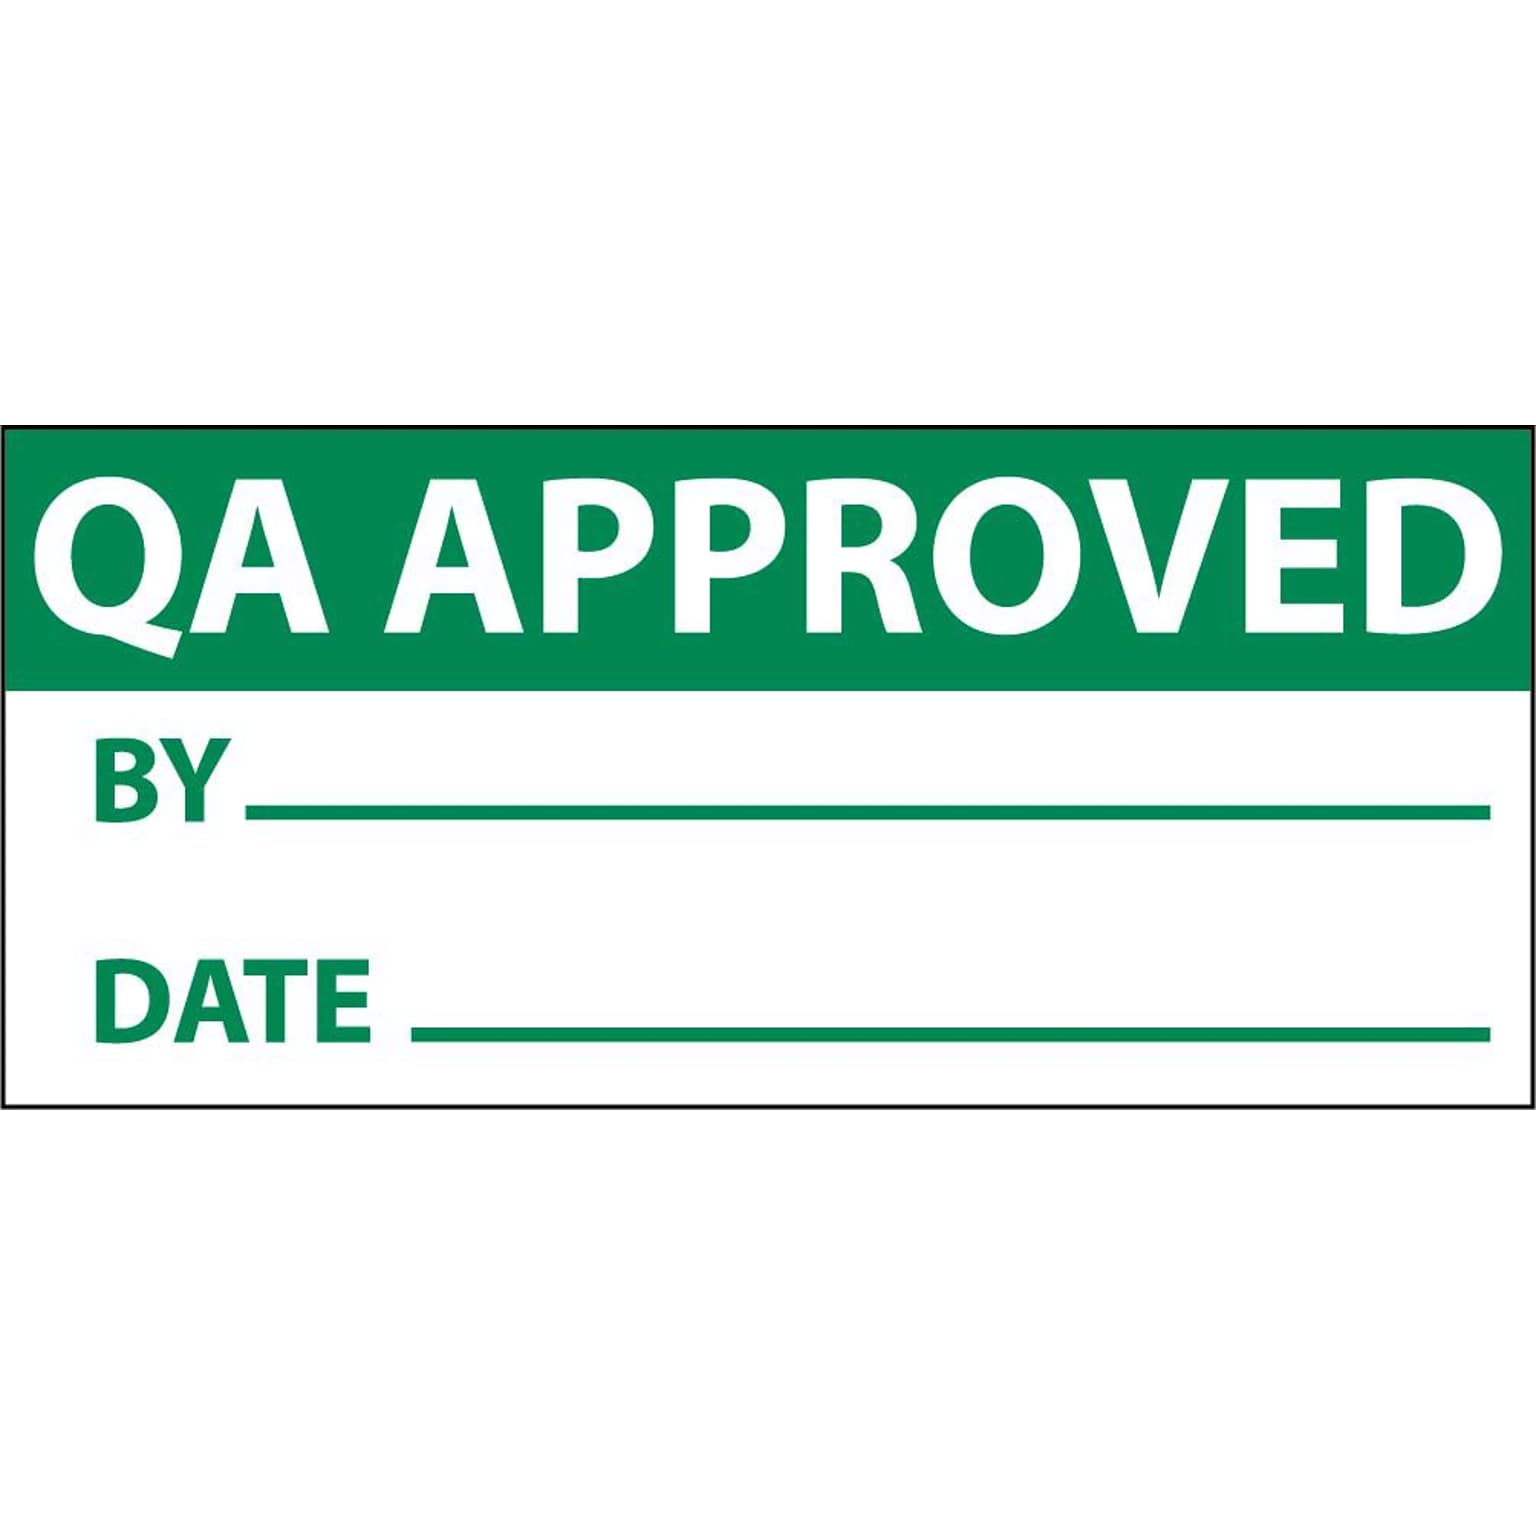 Inspection Labels; Qa Approved, Grn/Wht, 1 x 2 1/4, Adhesive Vinyl (27 Labels)